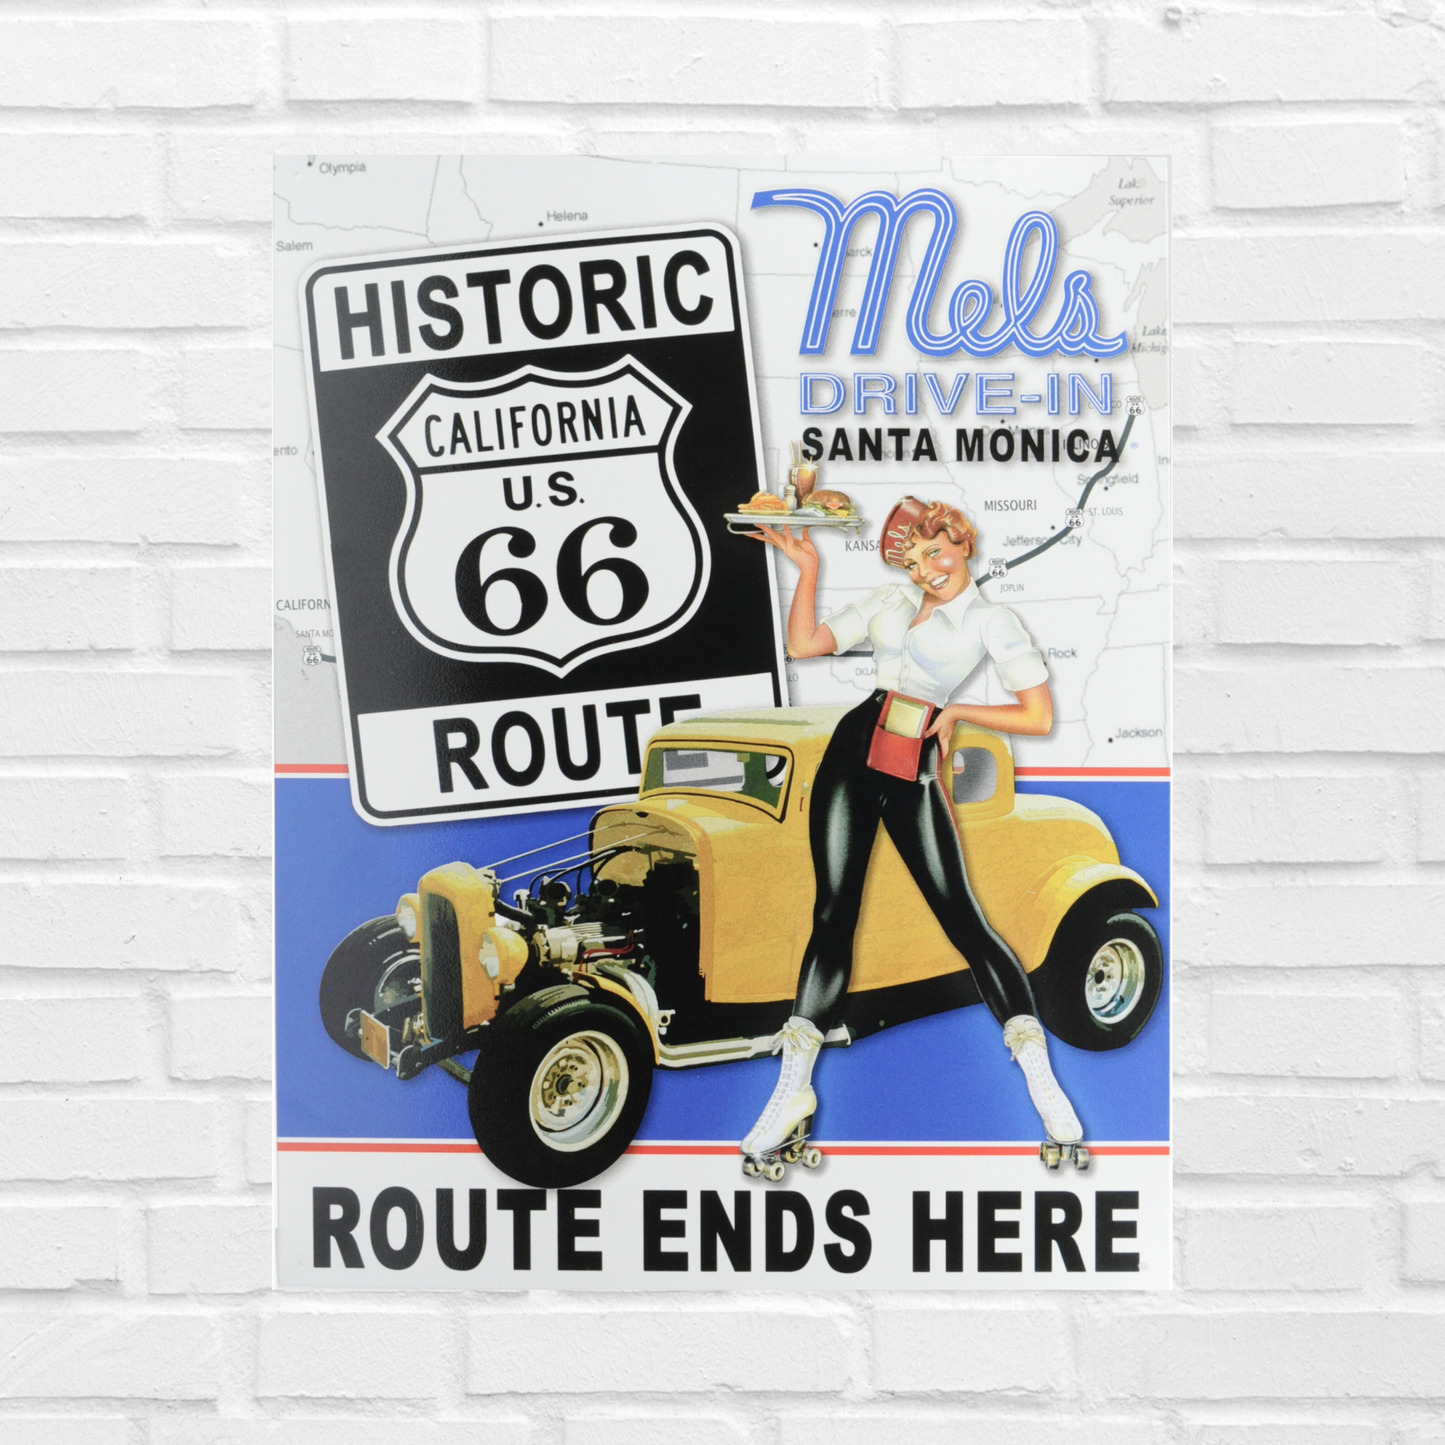 Vintage Poster Hot Rod Garage That says "Mel's Drive-in Santa Monica Historic California Route 66. Route ends here" with a yellow car and Diner waitress.